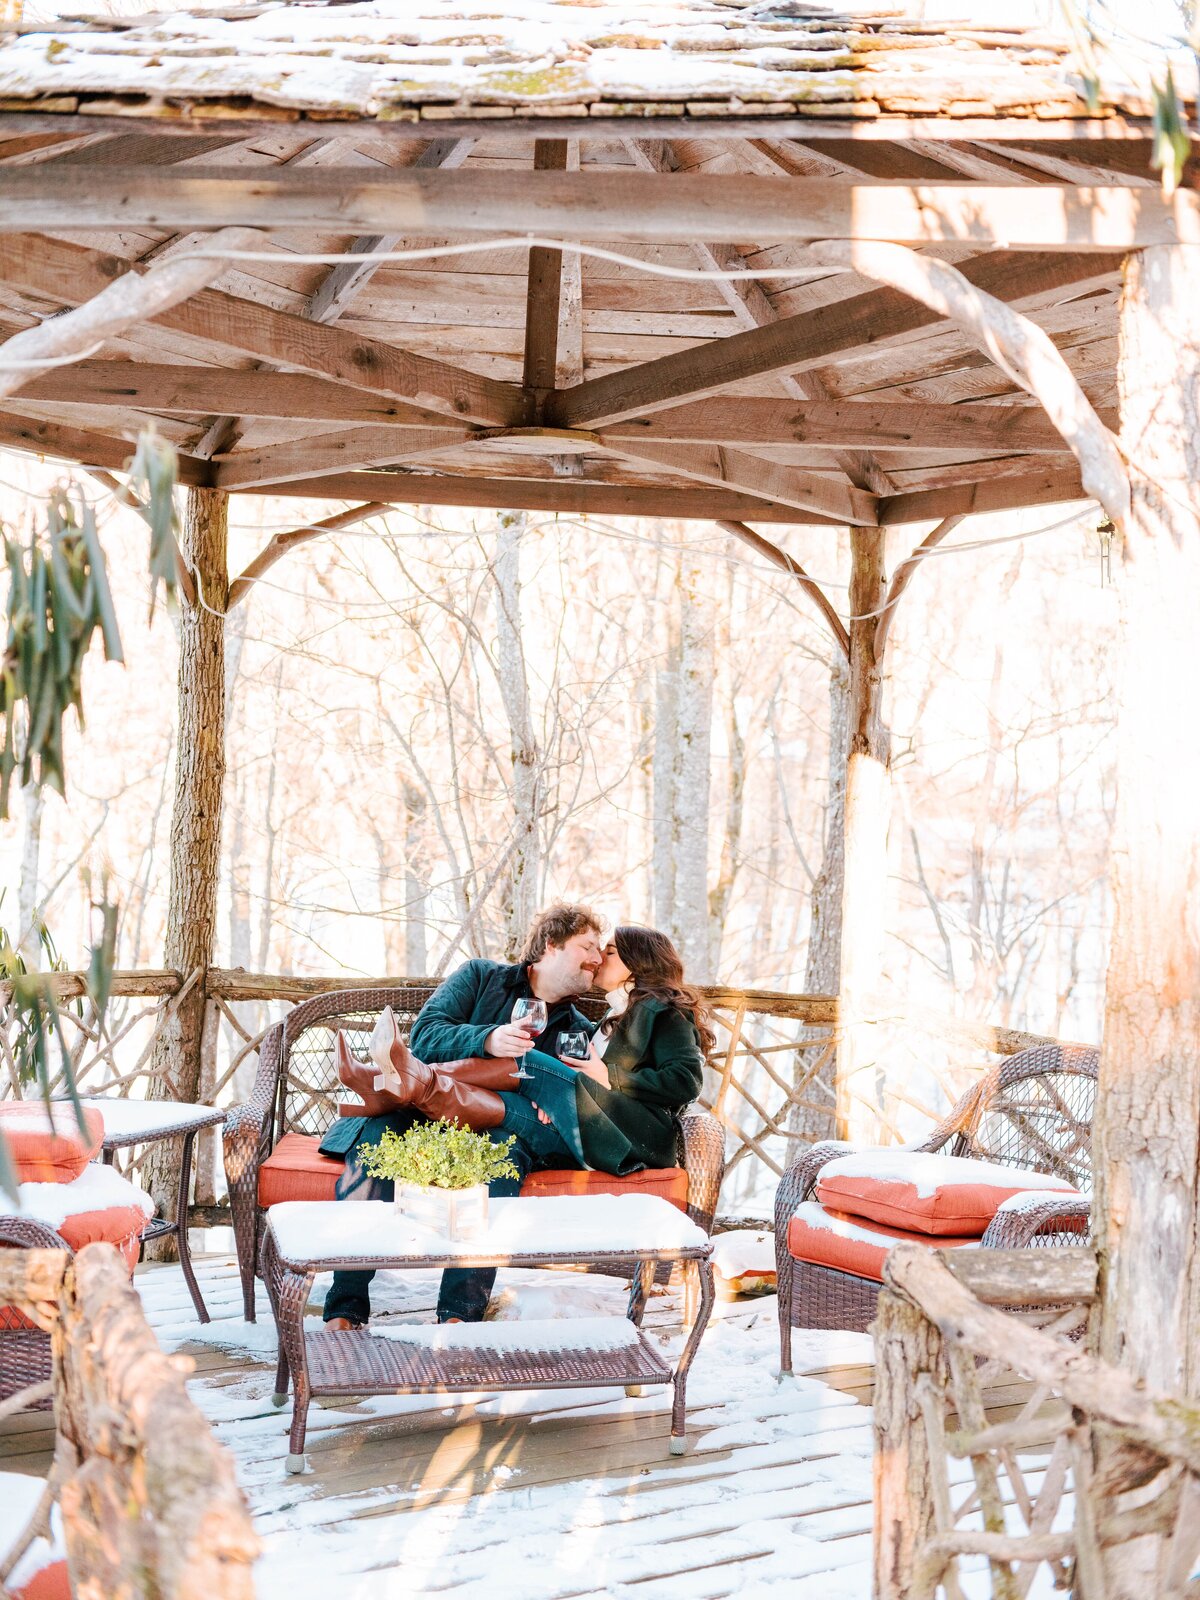 Jamie & Will Blowing Rock NC Winter Engagement Session_0730